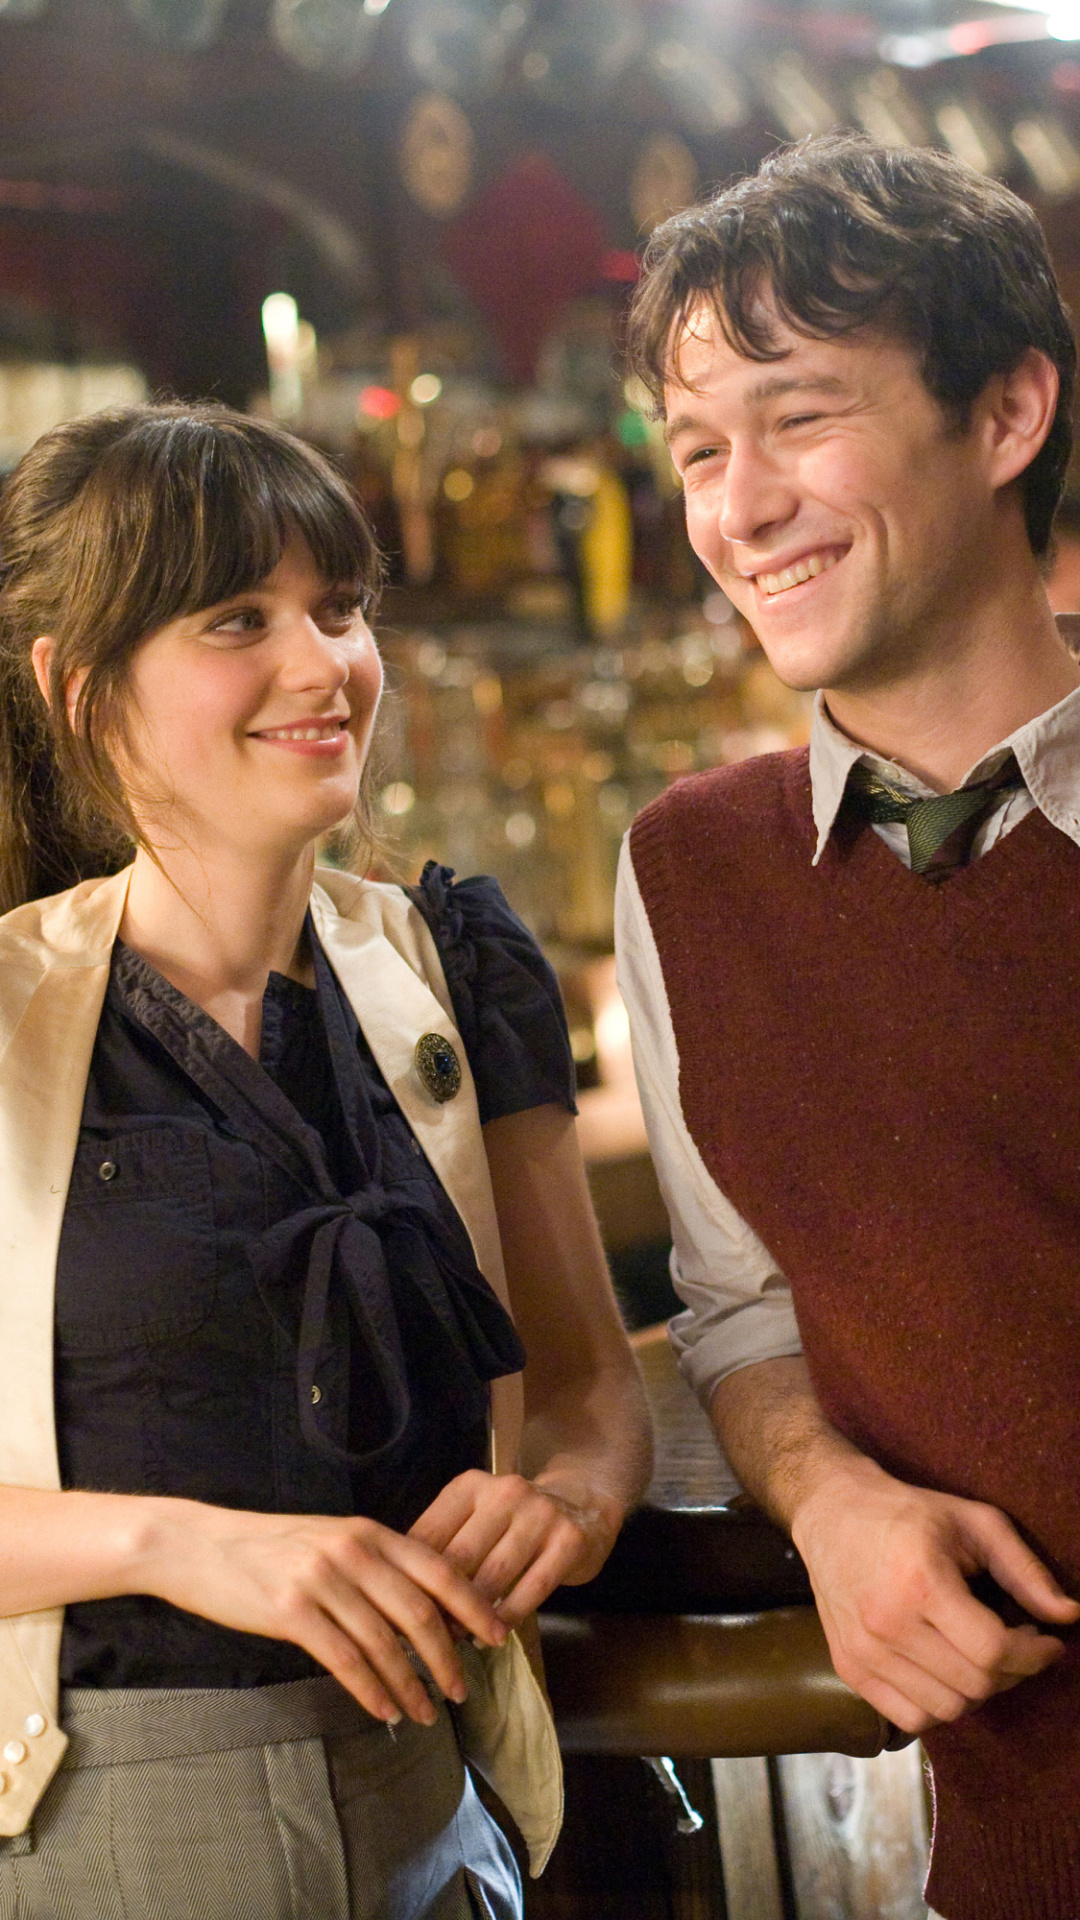 (500) Days of Summer: A greeting card copywriter reviews their relationship to find out what went wrong. 1080x1920 Full HD Wallpaper.